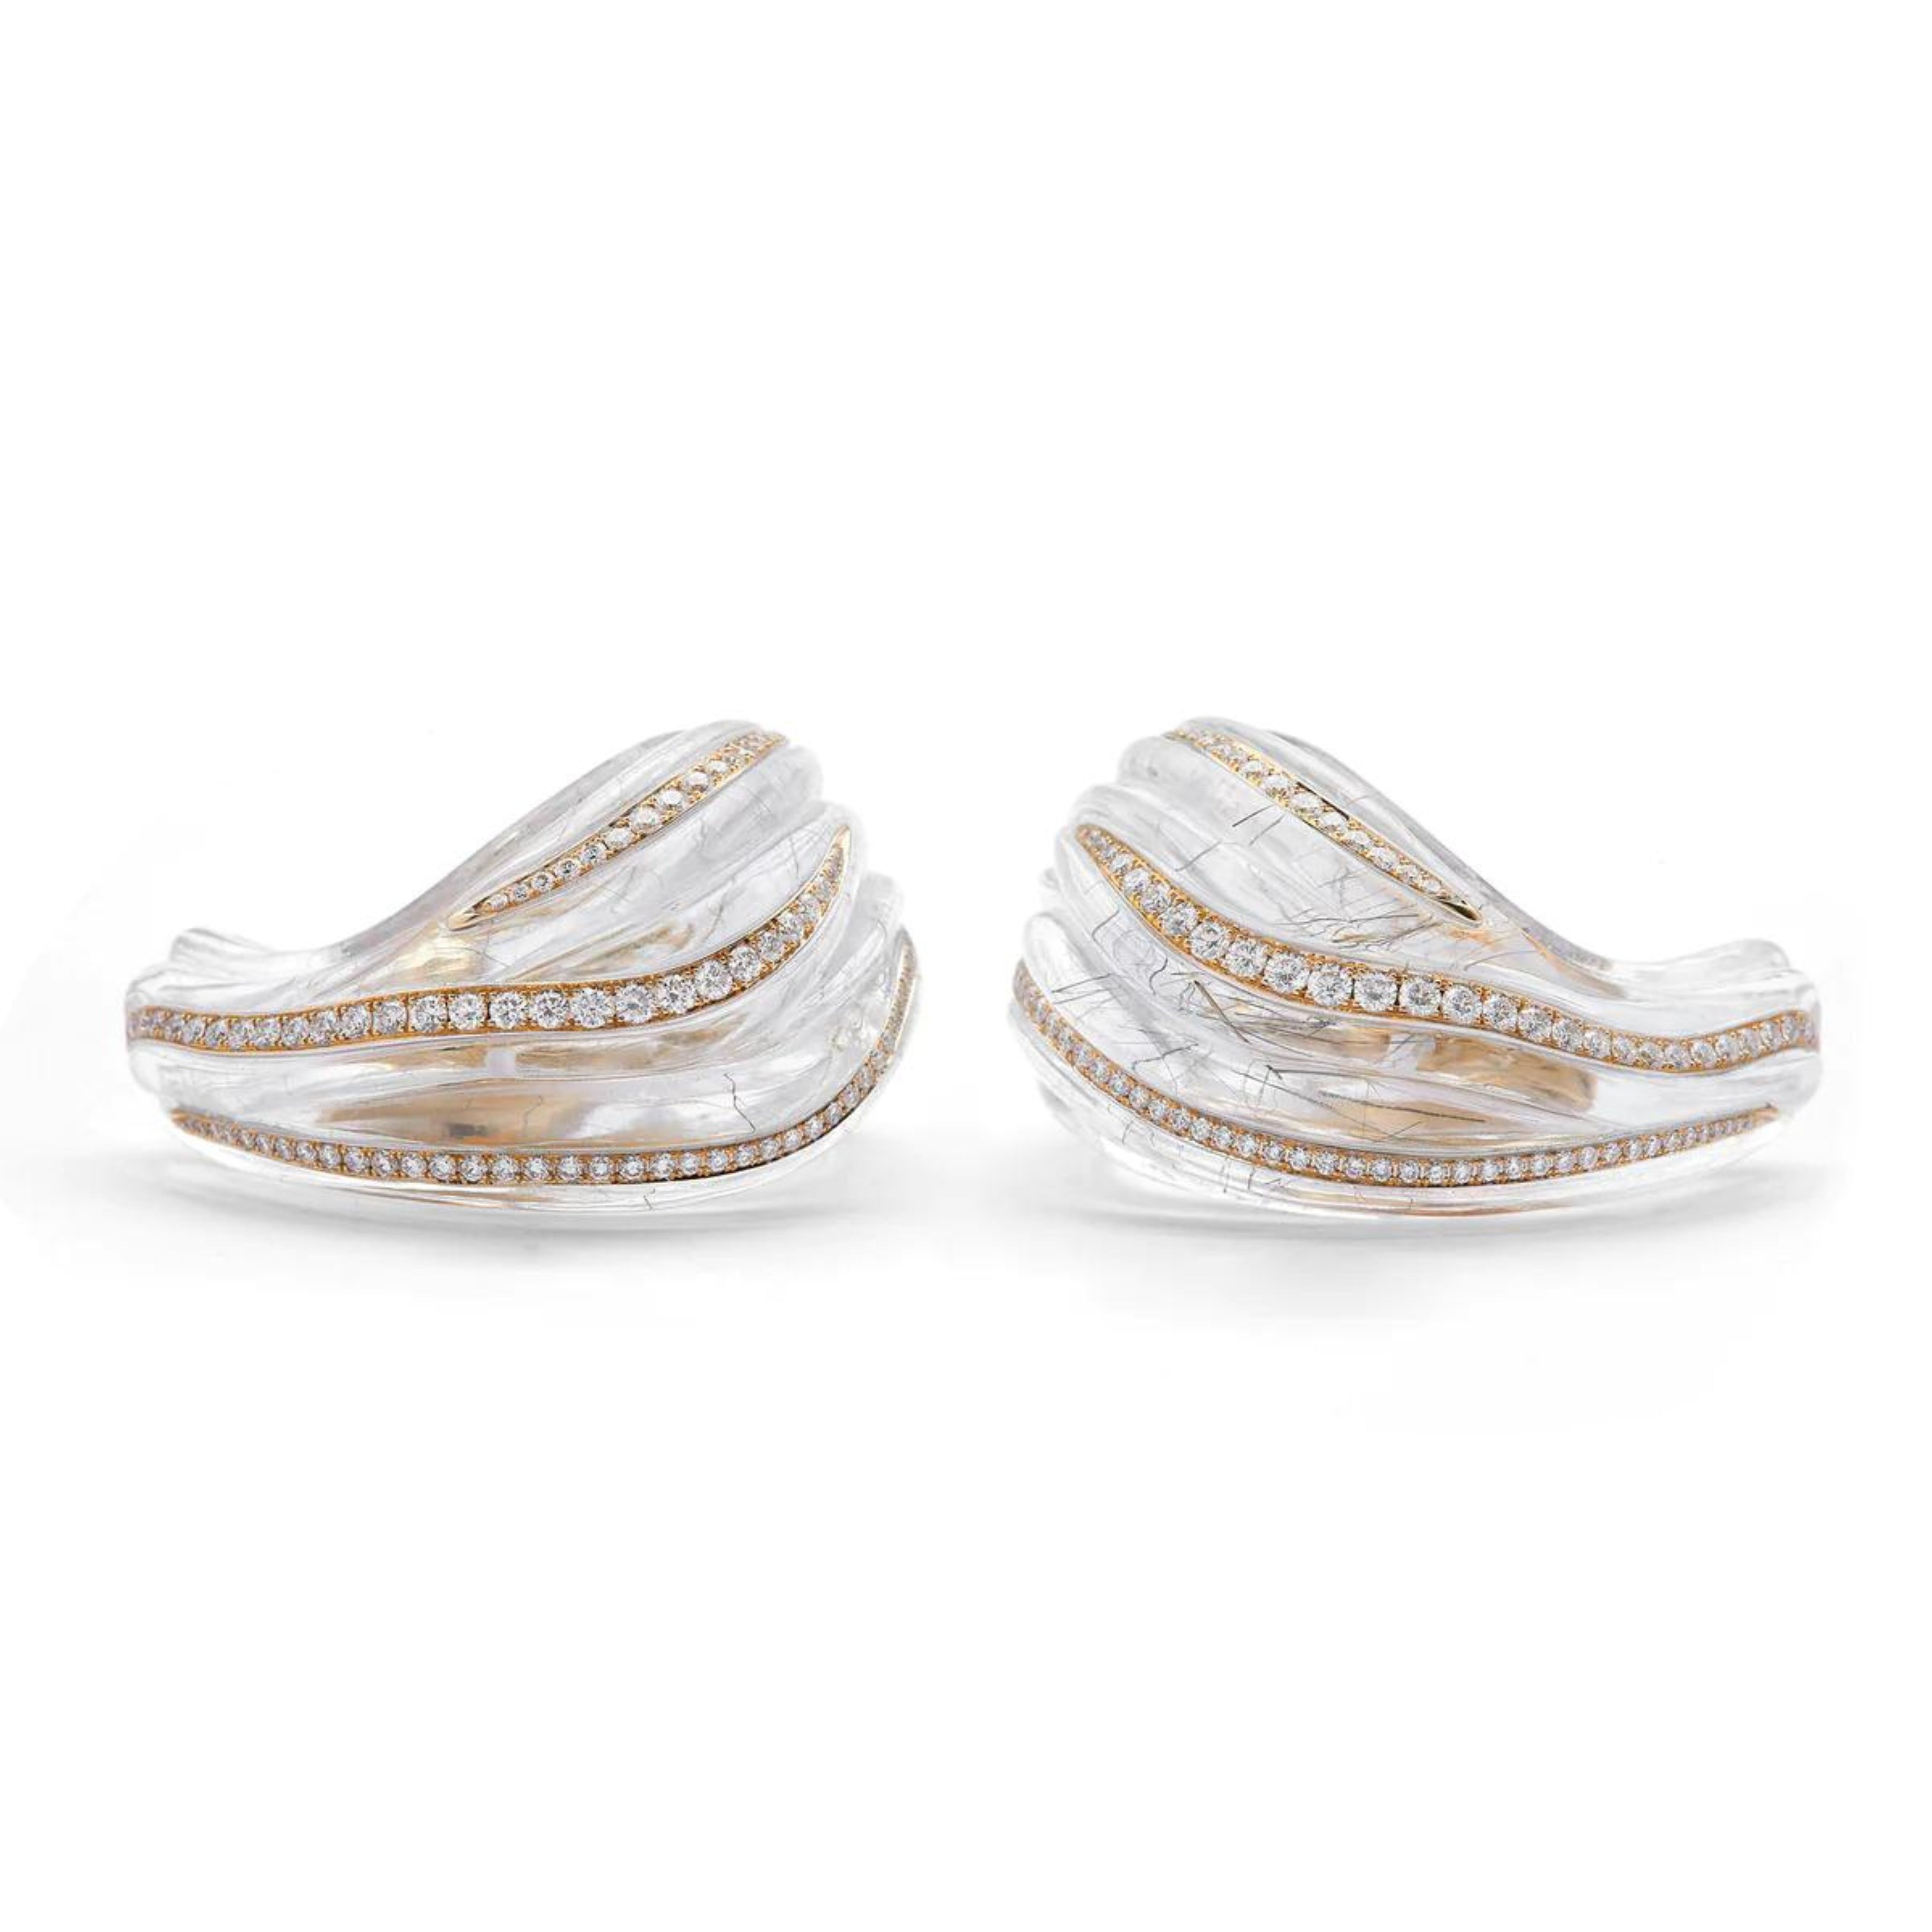 Bibi van der Velden Tidal Wave Earrings crafted with an 18K yellow gold base and accents, white diamonds, and rutile quartz. They are designed to evoke the powerful surge and delicate sparkle of a tidal wave. Front view.